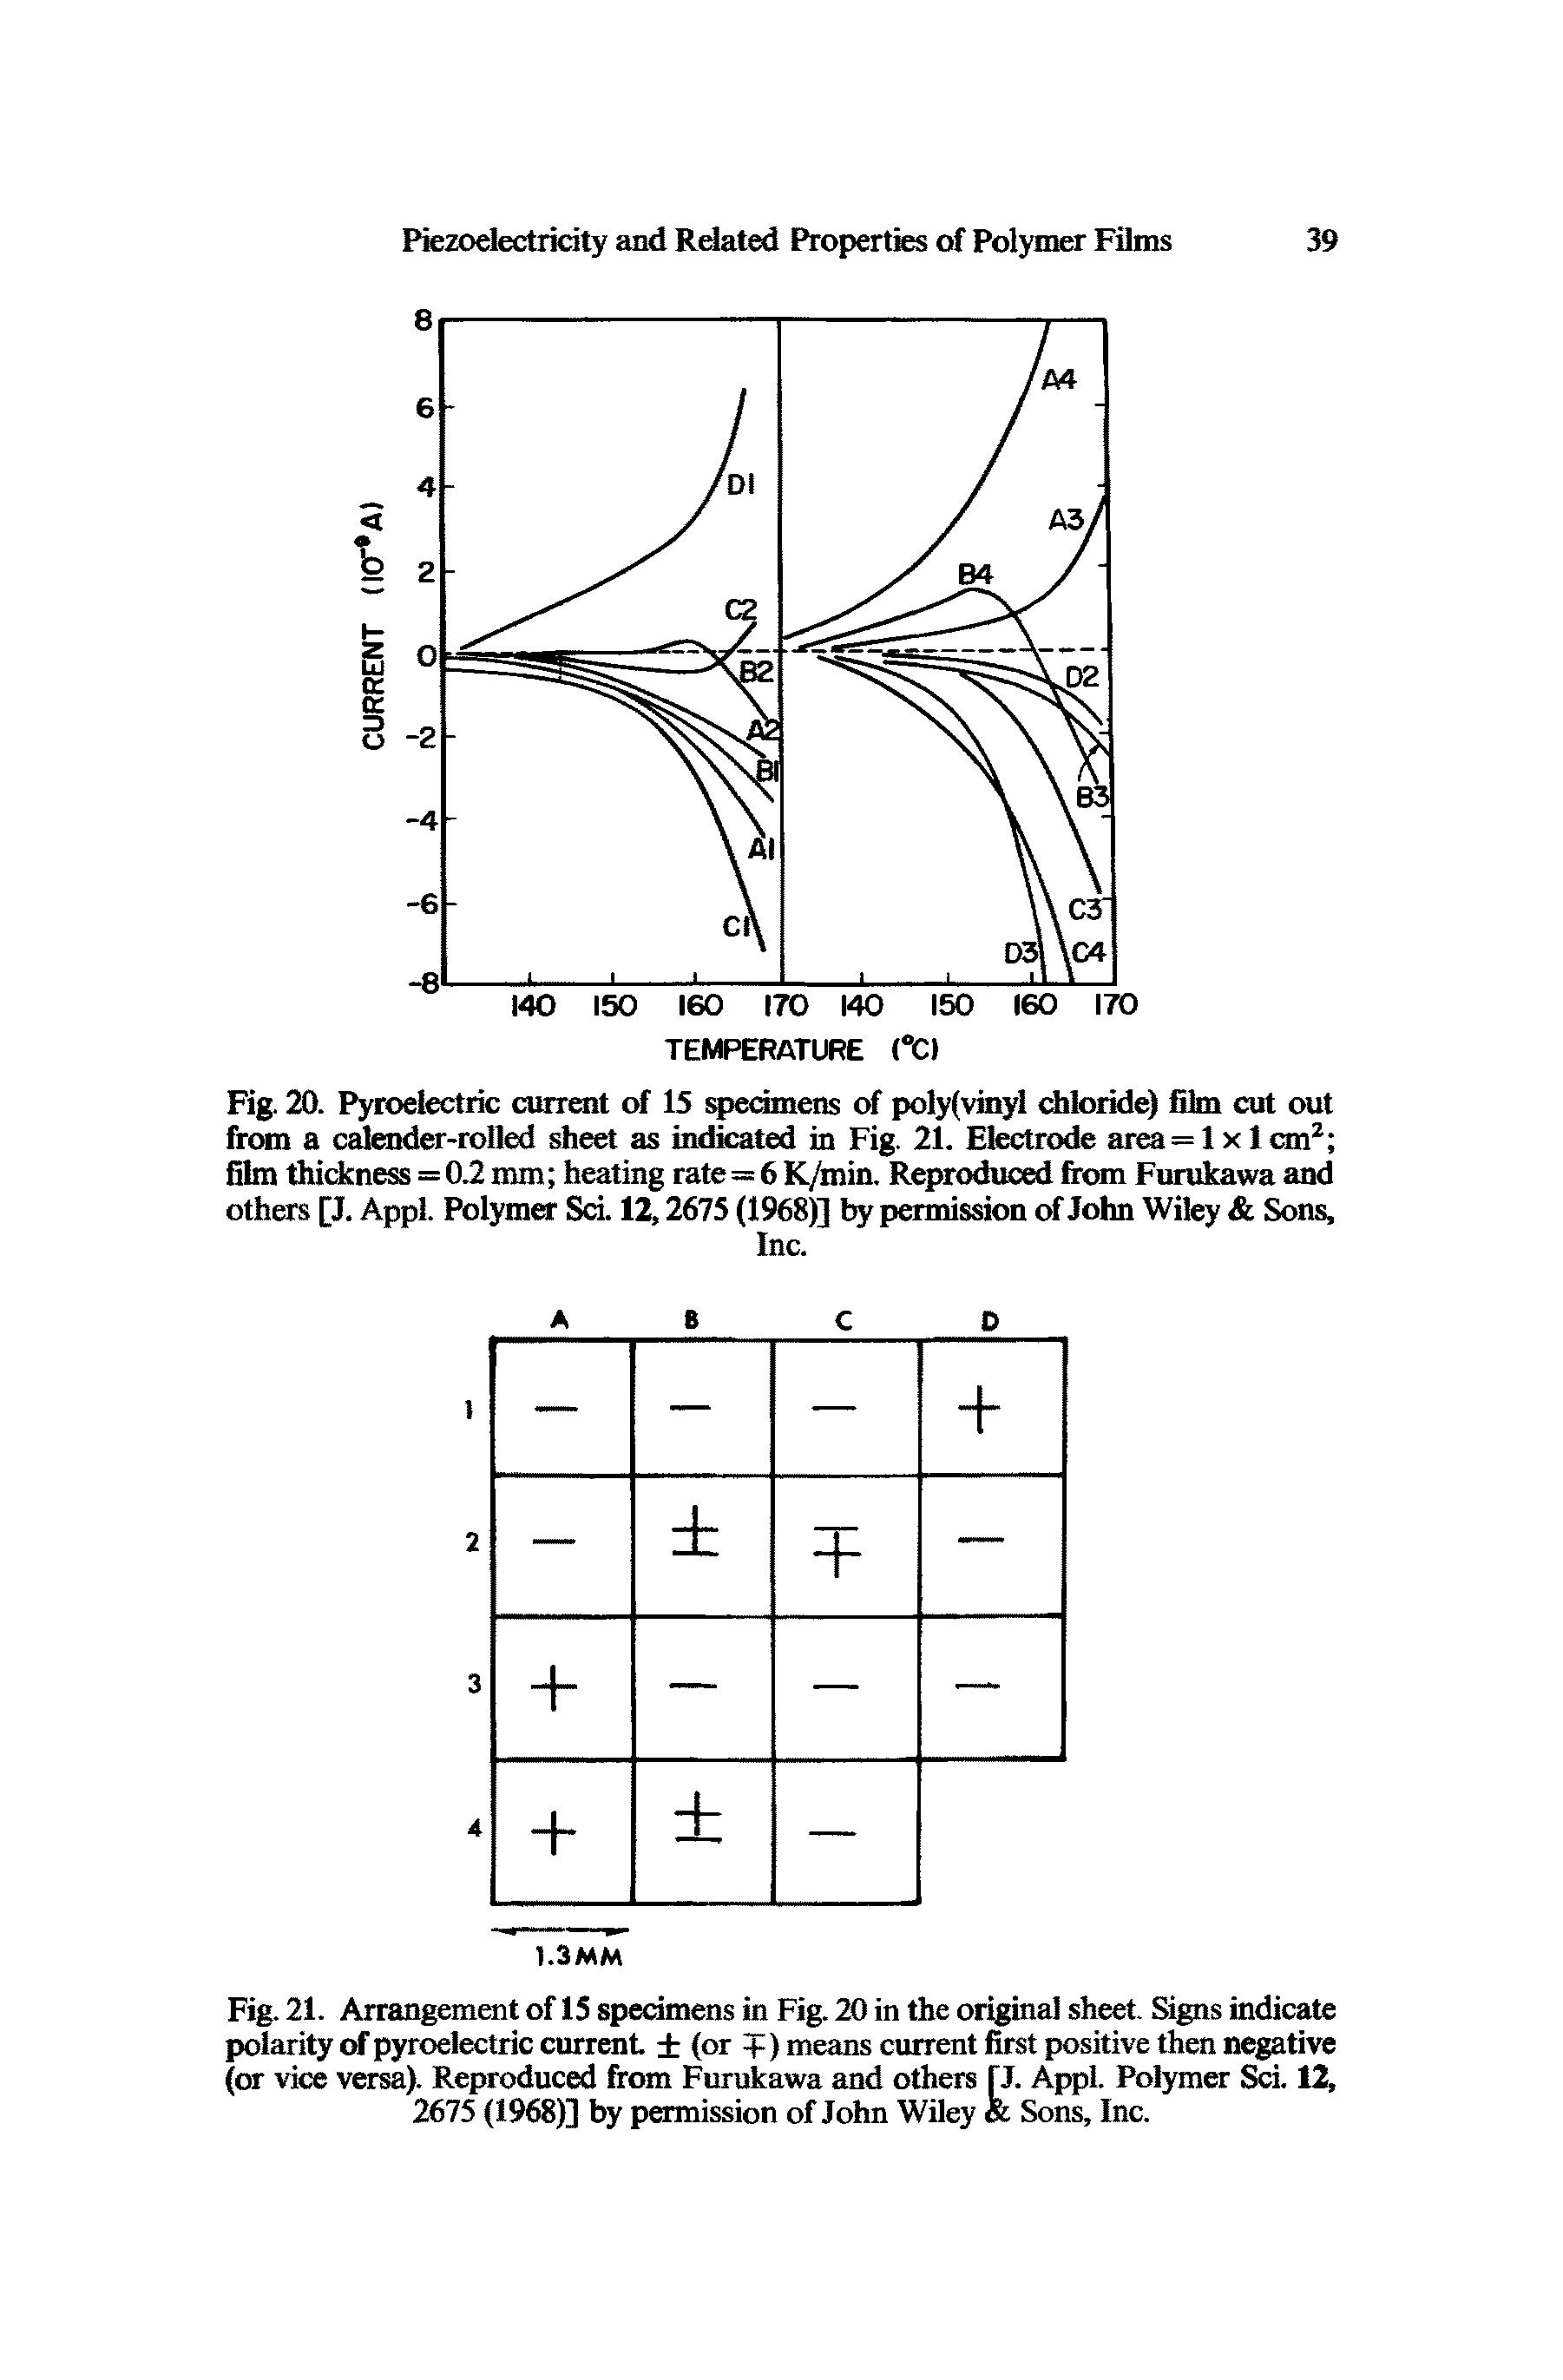 Fig. 20. Pyroelectric current of 15 specimens of poly(vinyl chloride) film cut out from a calender-rolled sheet as indicated in Fig. 21. Electrode area = 1 x 1 cm2 film thickness = 0.2 mm heating rate=6 K/min. Reproduced from Furukawa and others [J. Appl. Polymer Sci. 12,2675 (1968)] by permission of John Wiley Sons,...